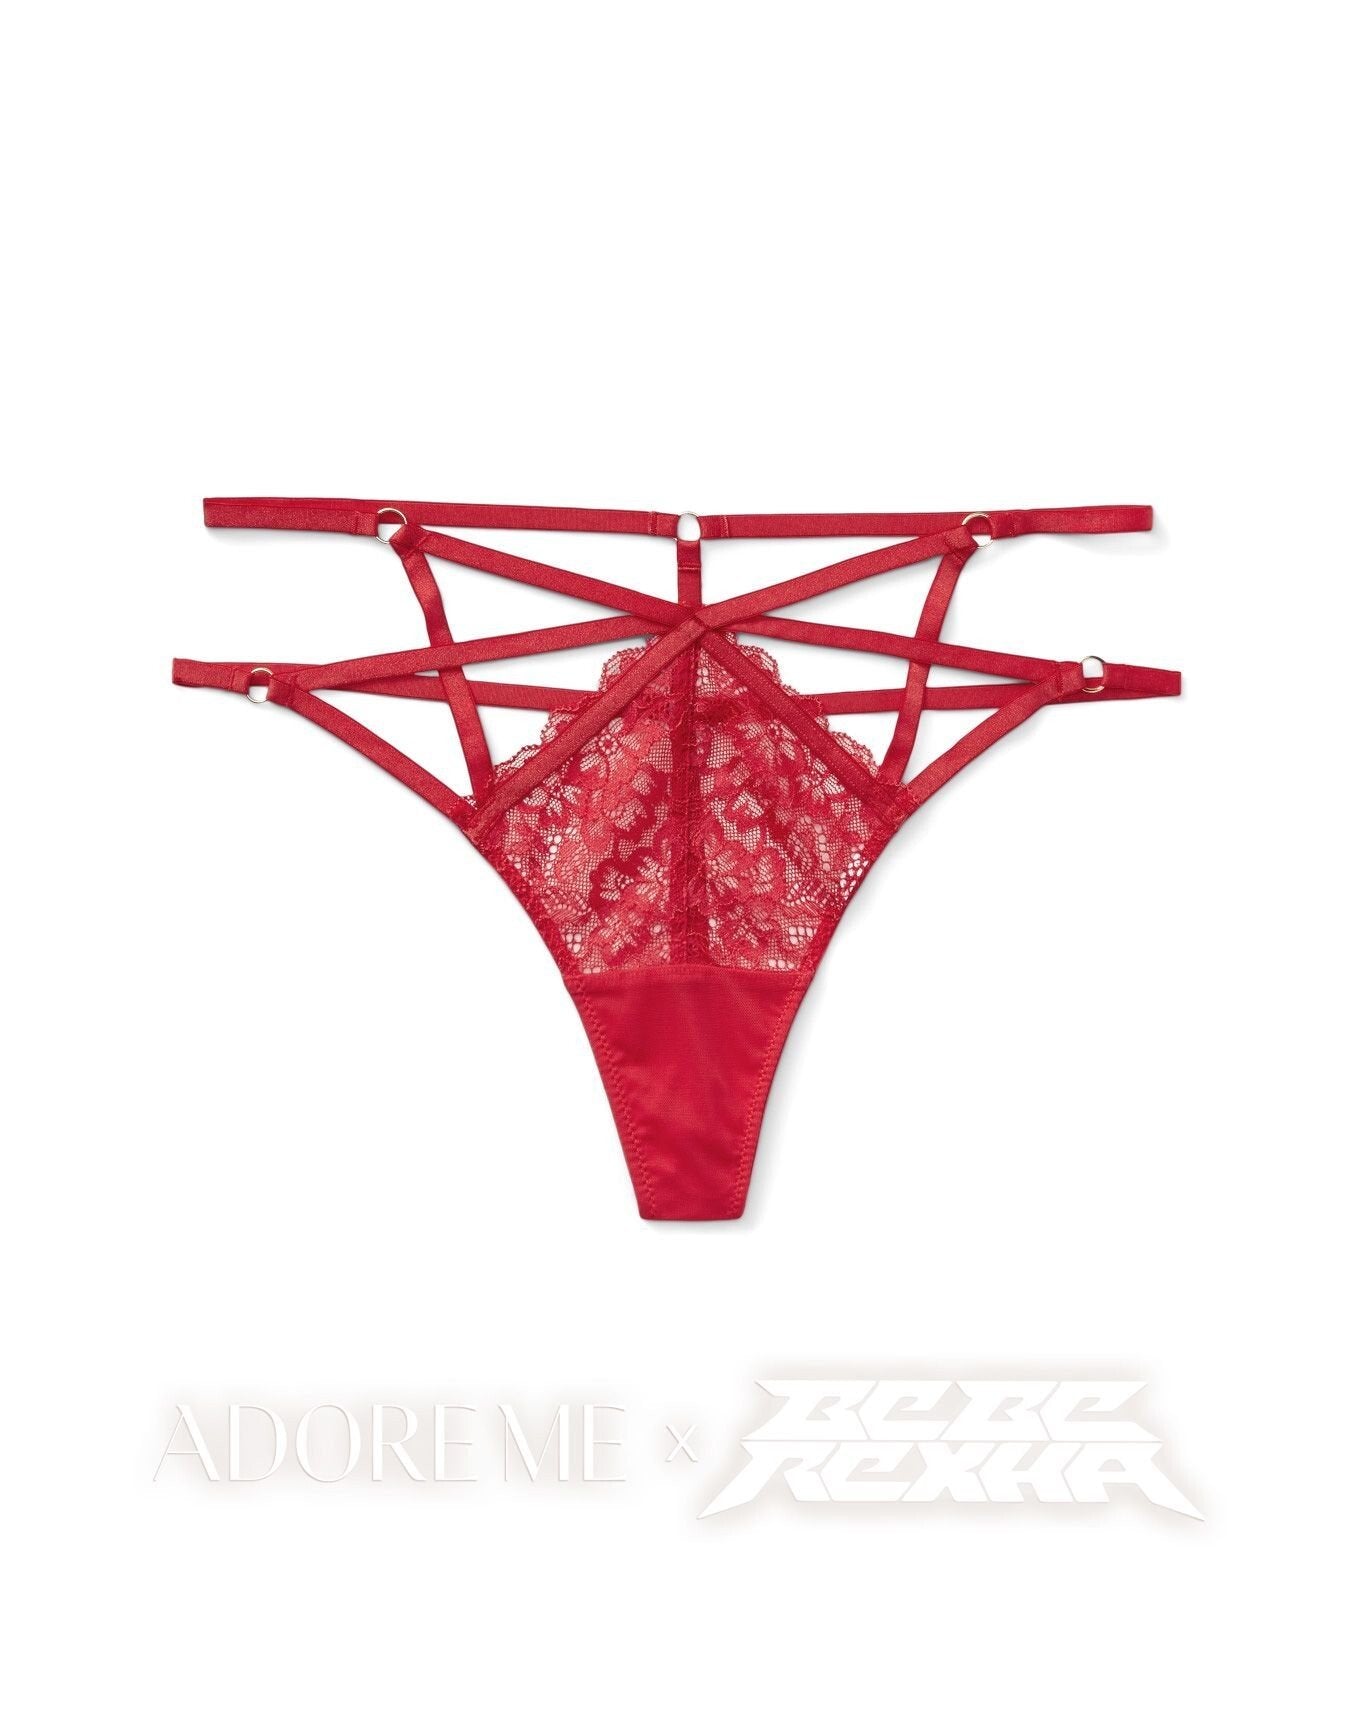 Adore Me Vianna G-String in color Poinsettia and shape g-string